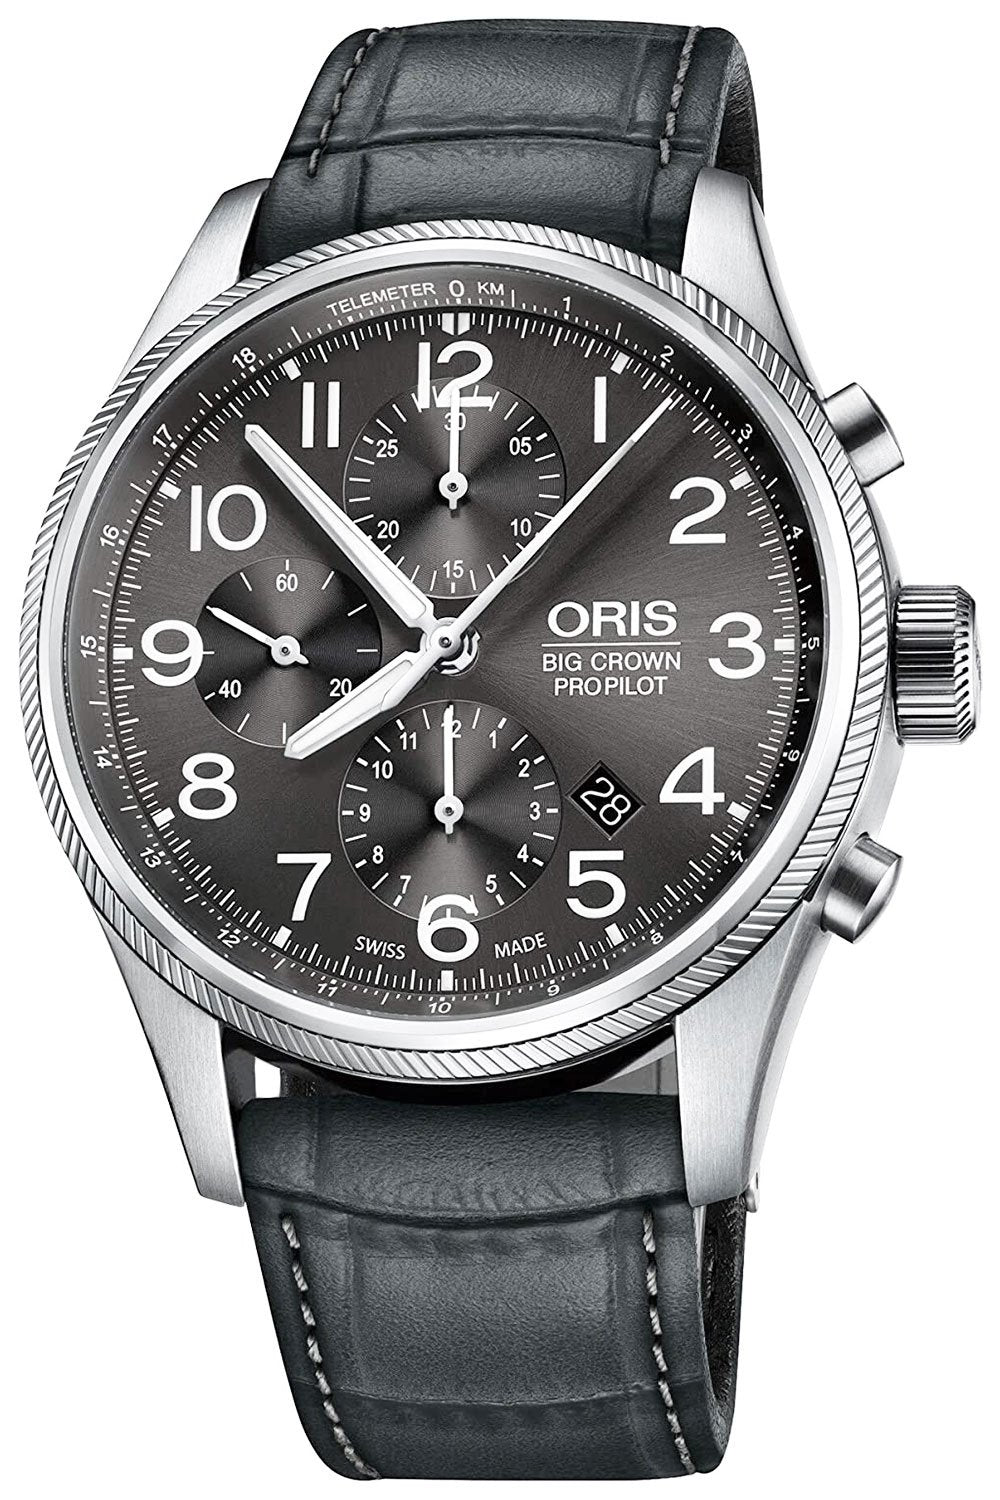 Watches - Mens-Oris-774 7699 4063-LS-12-hour display, 40 - 45 mm, Big Crown ProPilot, chronograph, date, gray, leather, mens, menswatches, new arrivals, Oris, round, seconds sub-dial, stainless steel case, swiss automatic, watches-Watches & Beyond